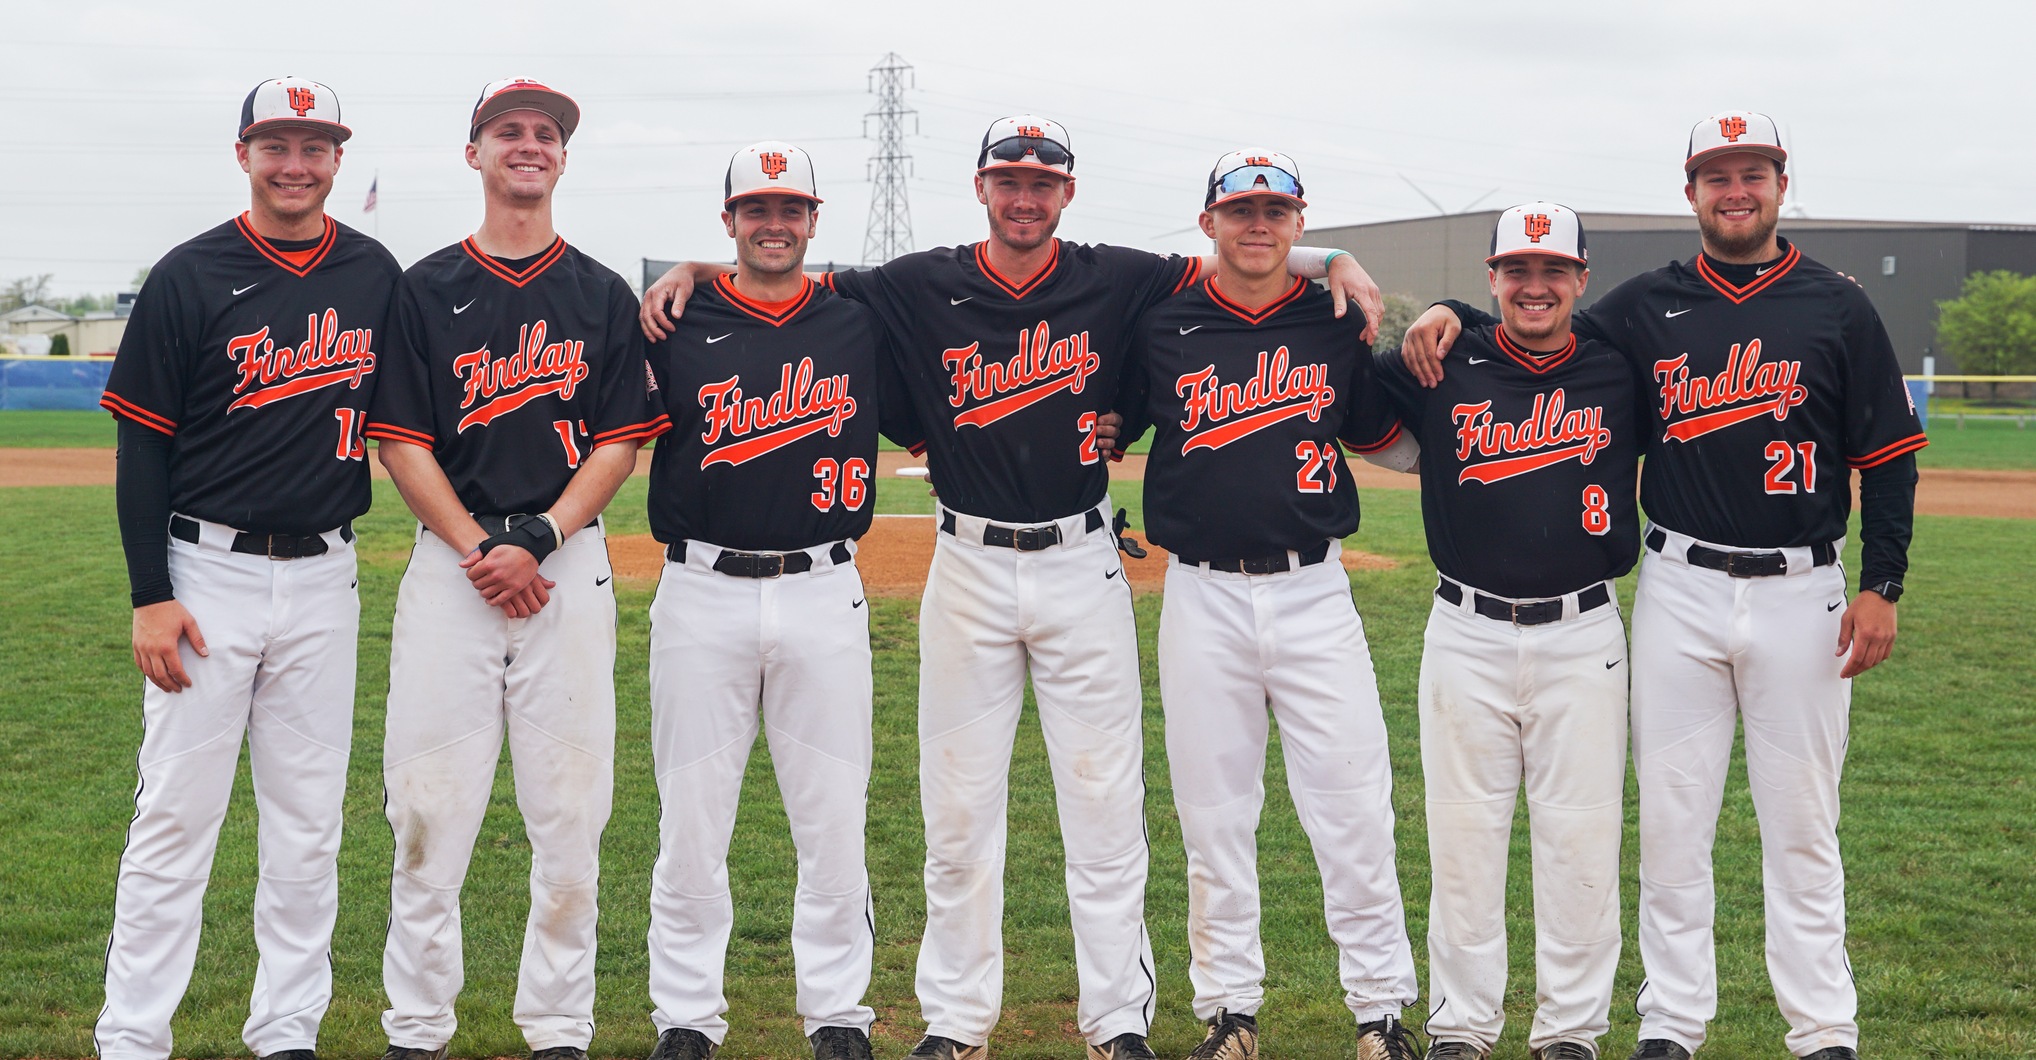 Memorable Moments Highlight Senior Day Split with Cedarville